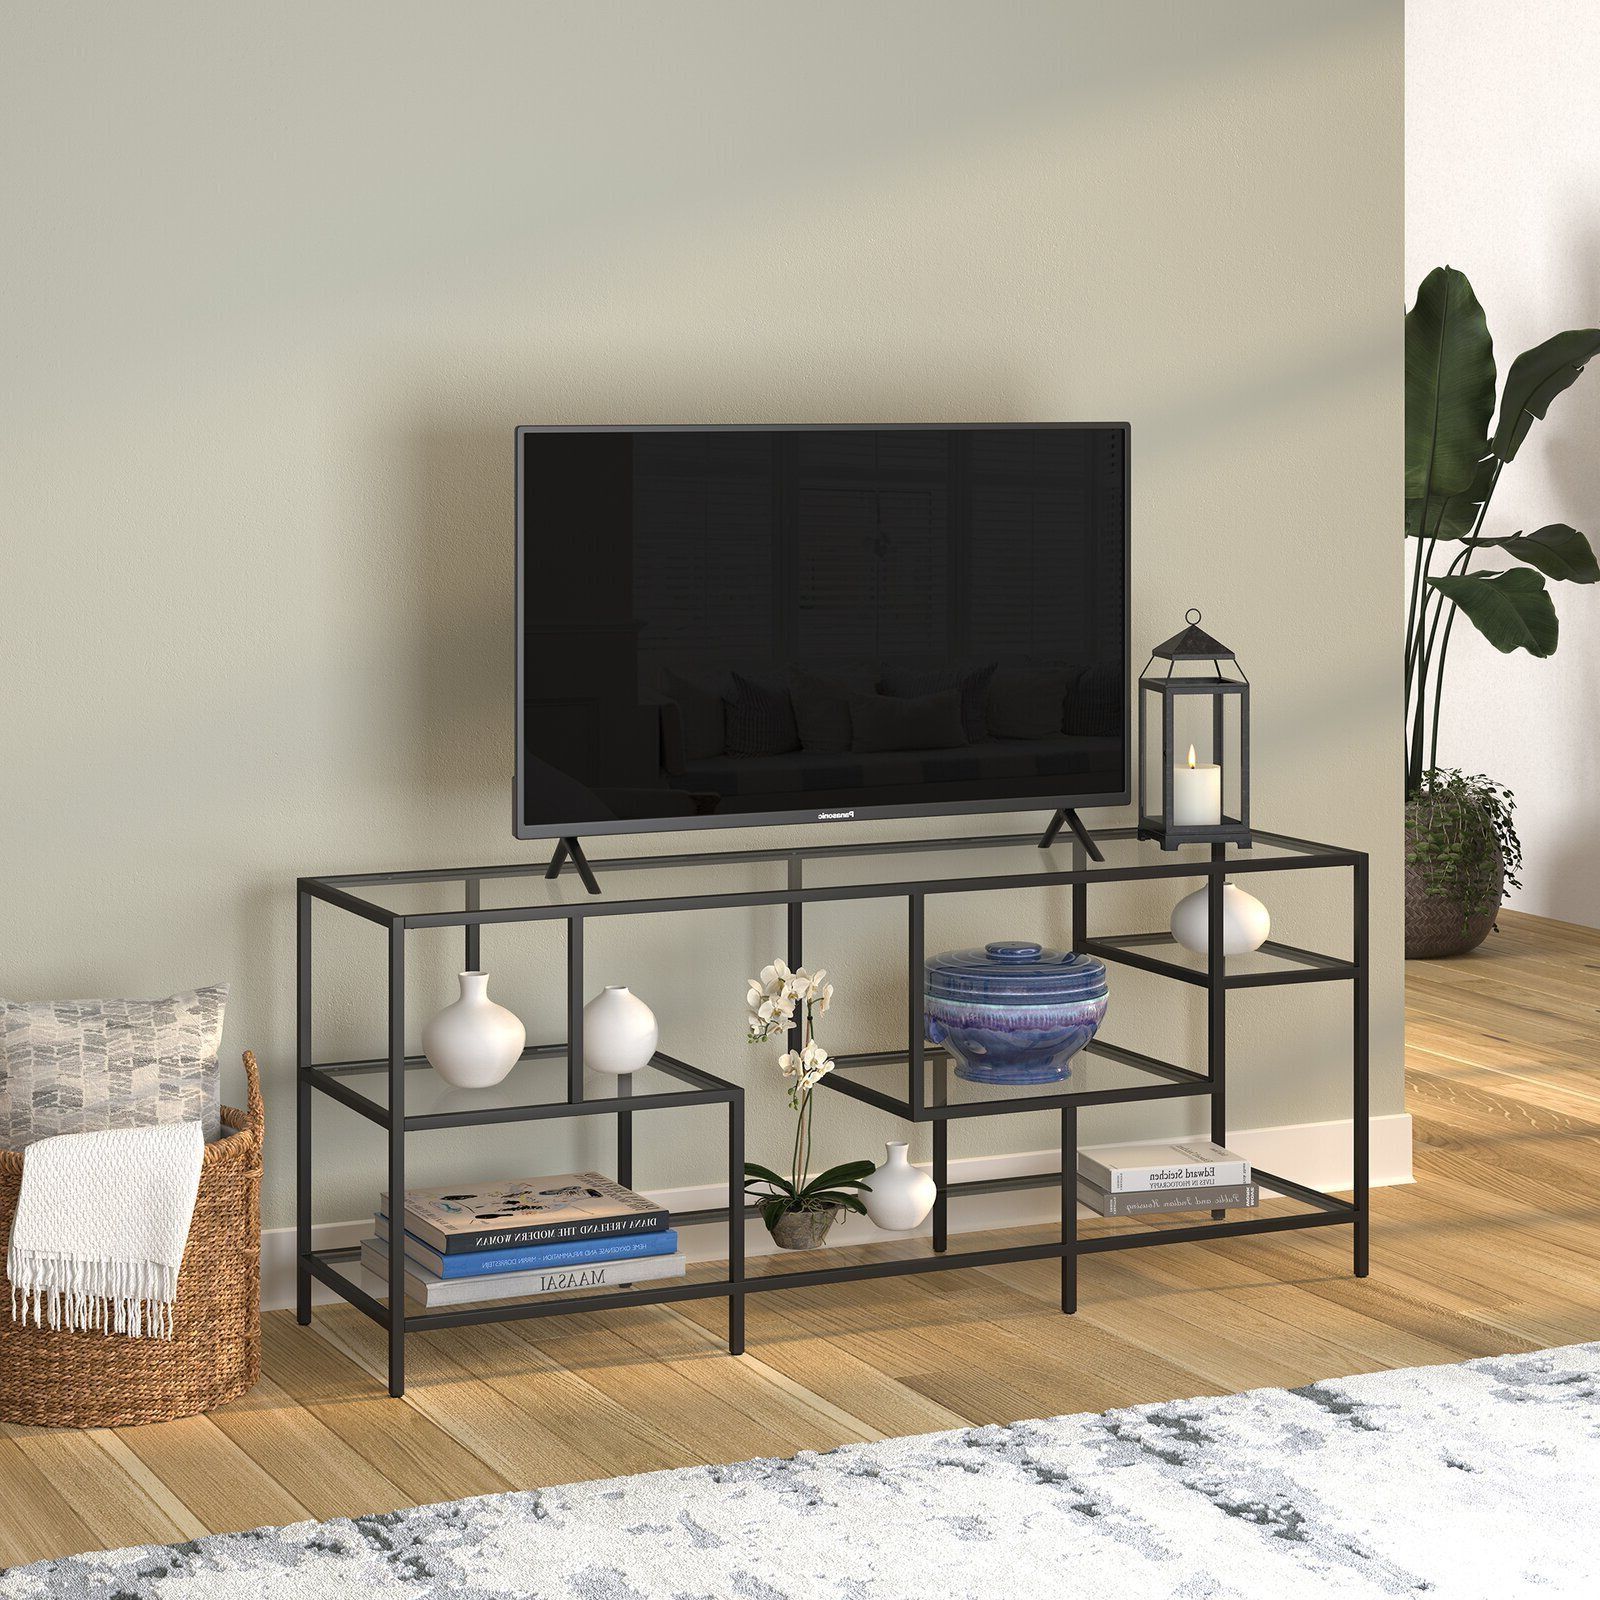 Recent Glass Tv Stands With Storage Shelf Regarding Glass Tv Stands – Ideas On Foter (View 9 of 10)